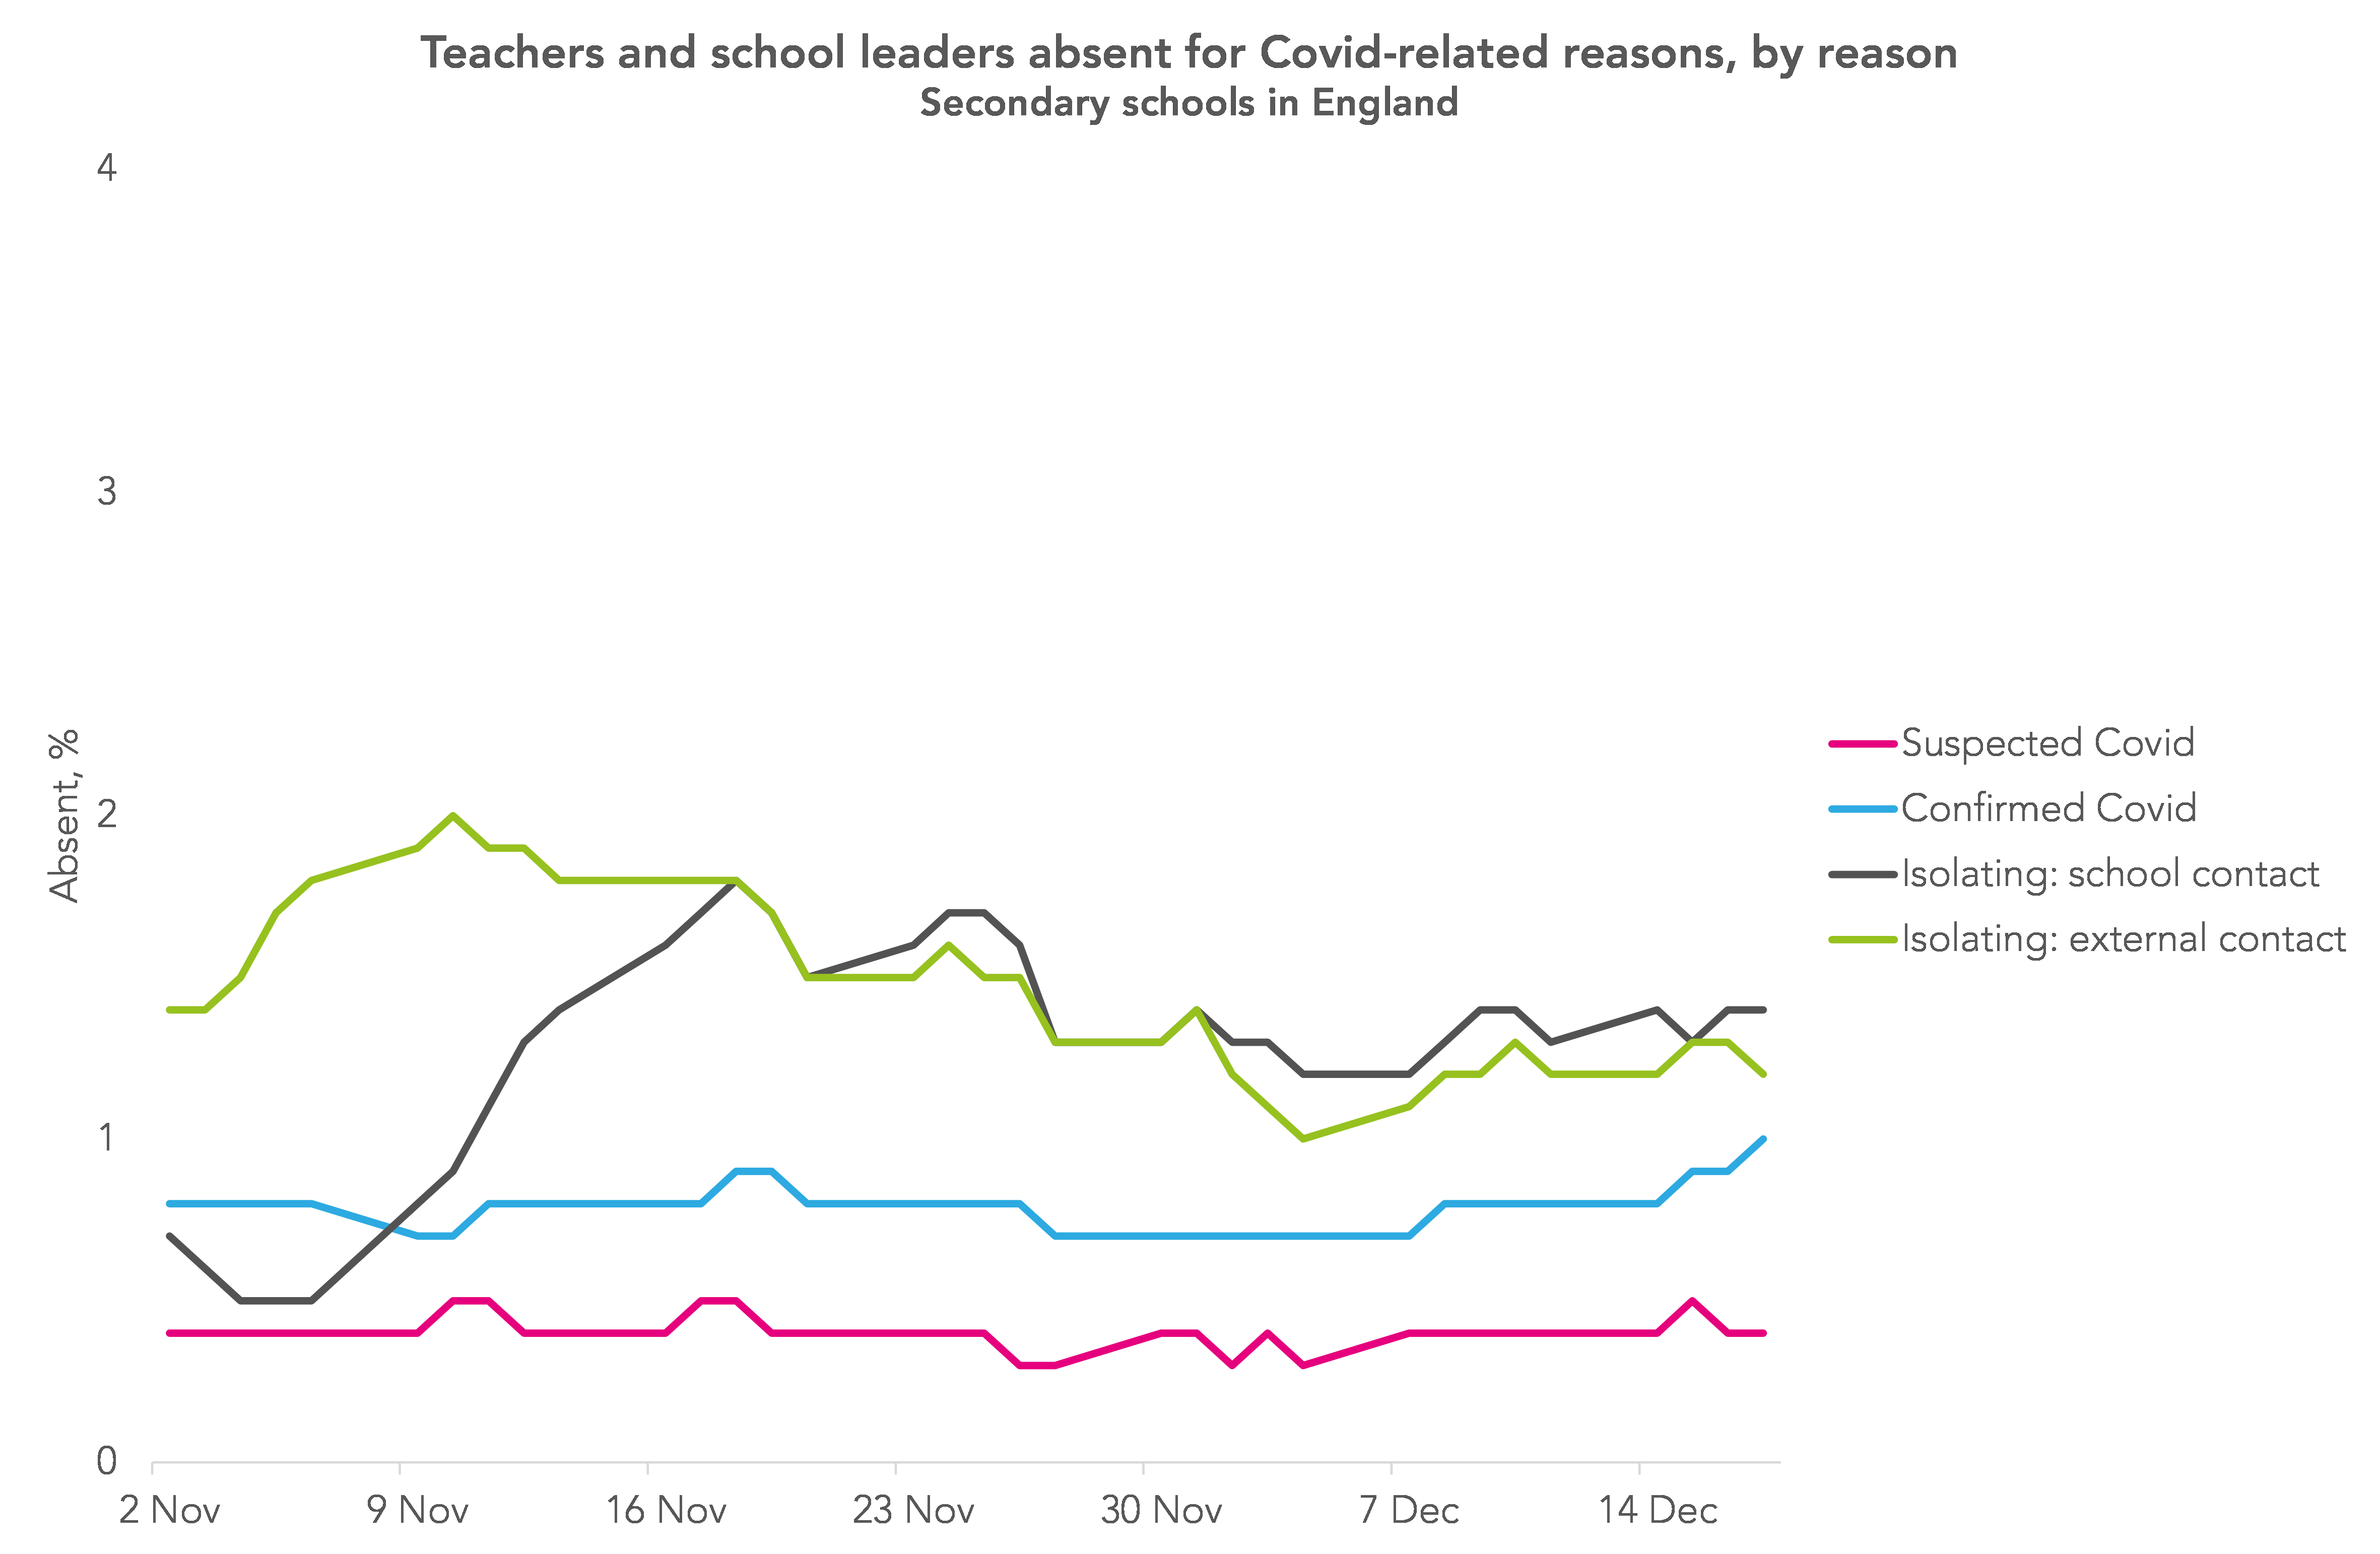 Graph showing secondary teacher absence rates